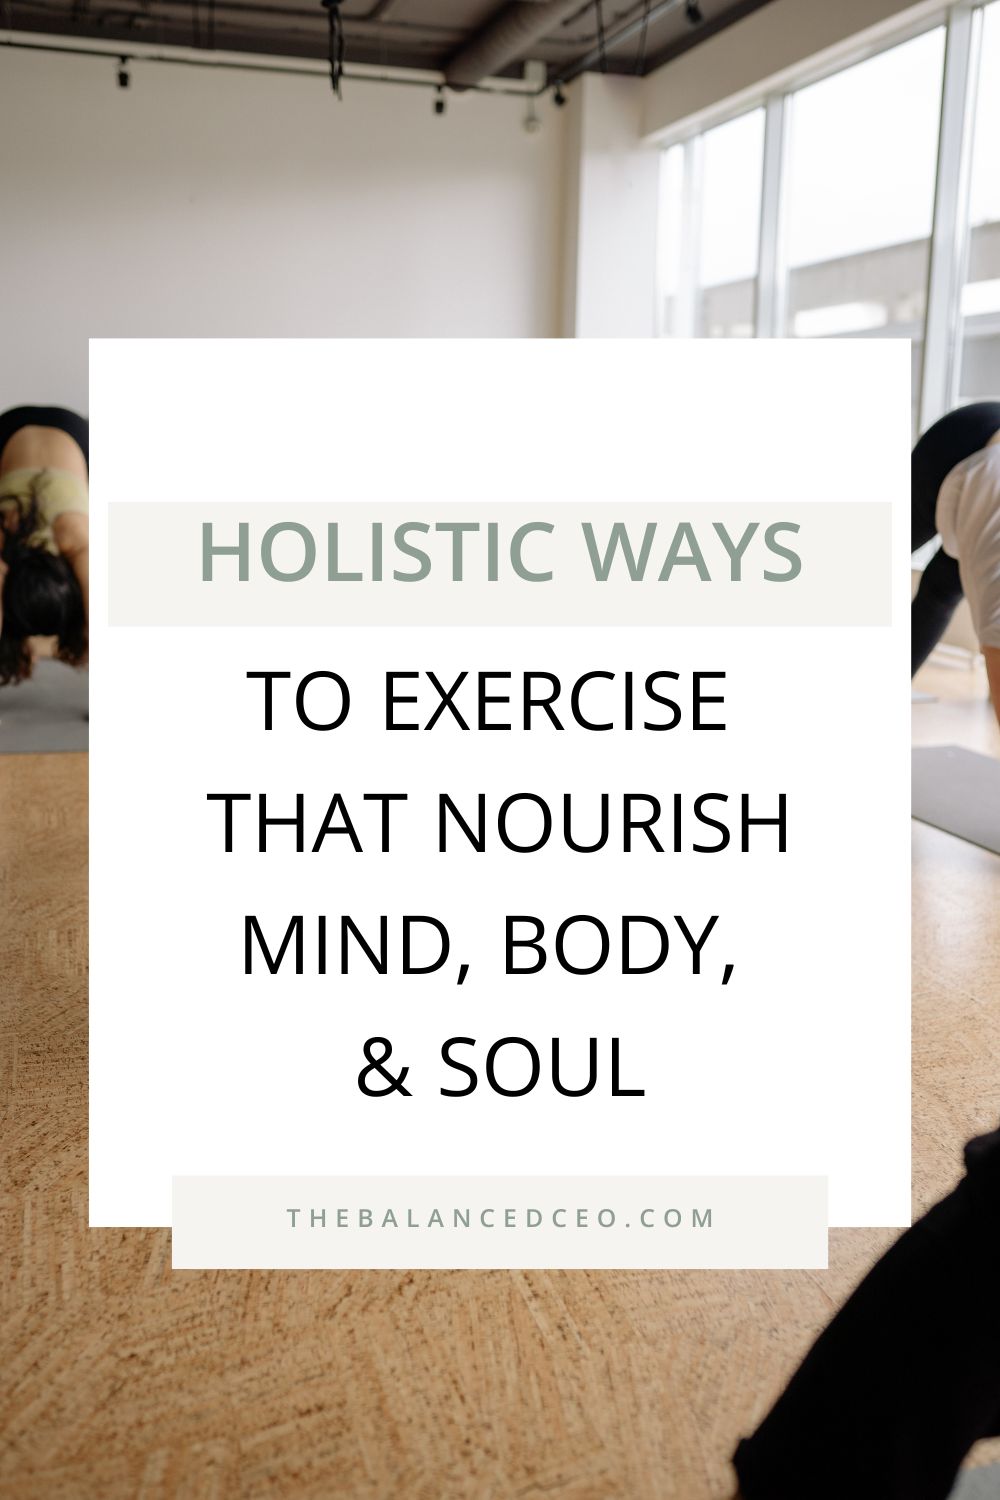 Holistic Ways to Exercise That Nourish Mind, Body, and Soul